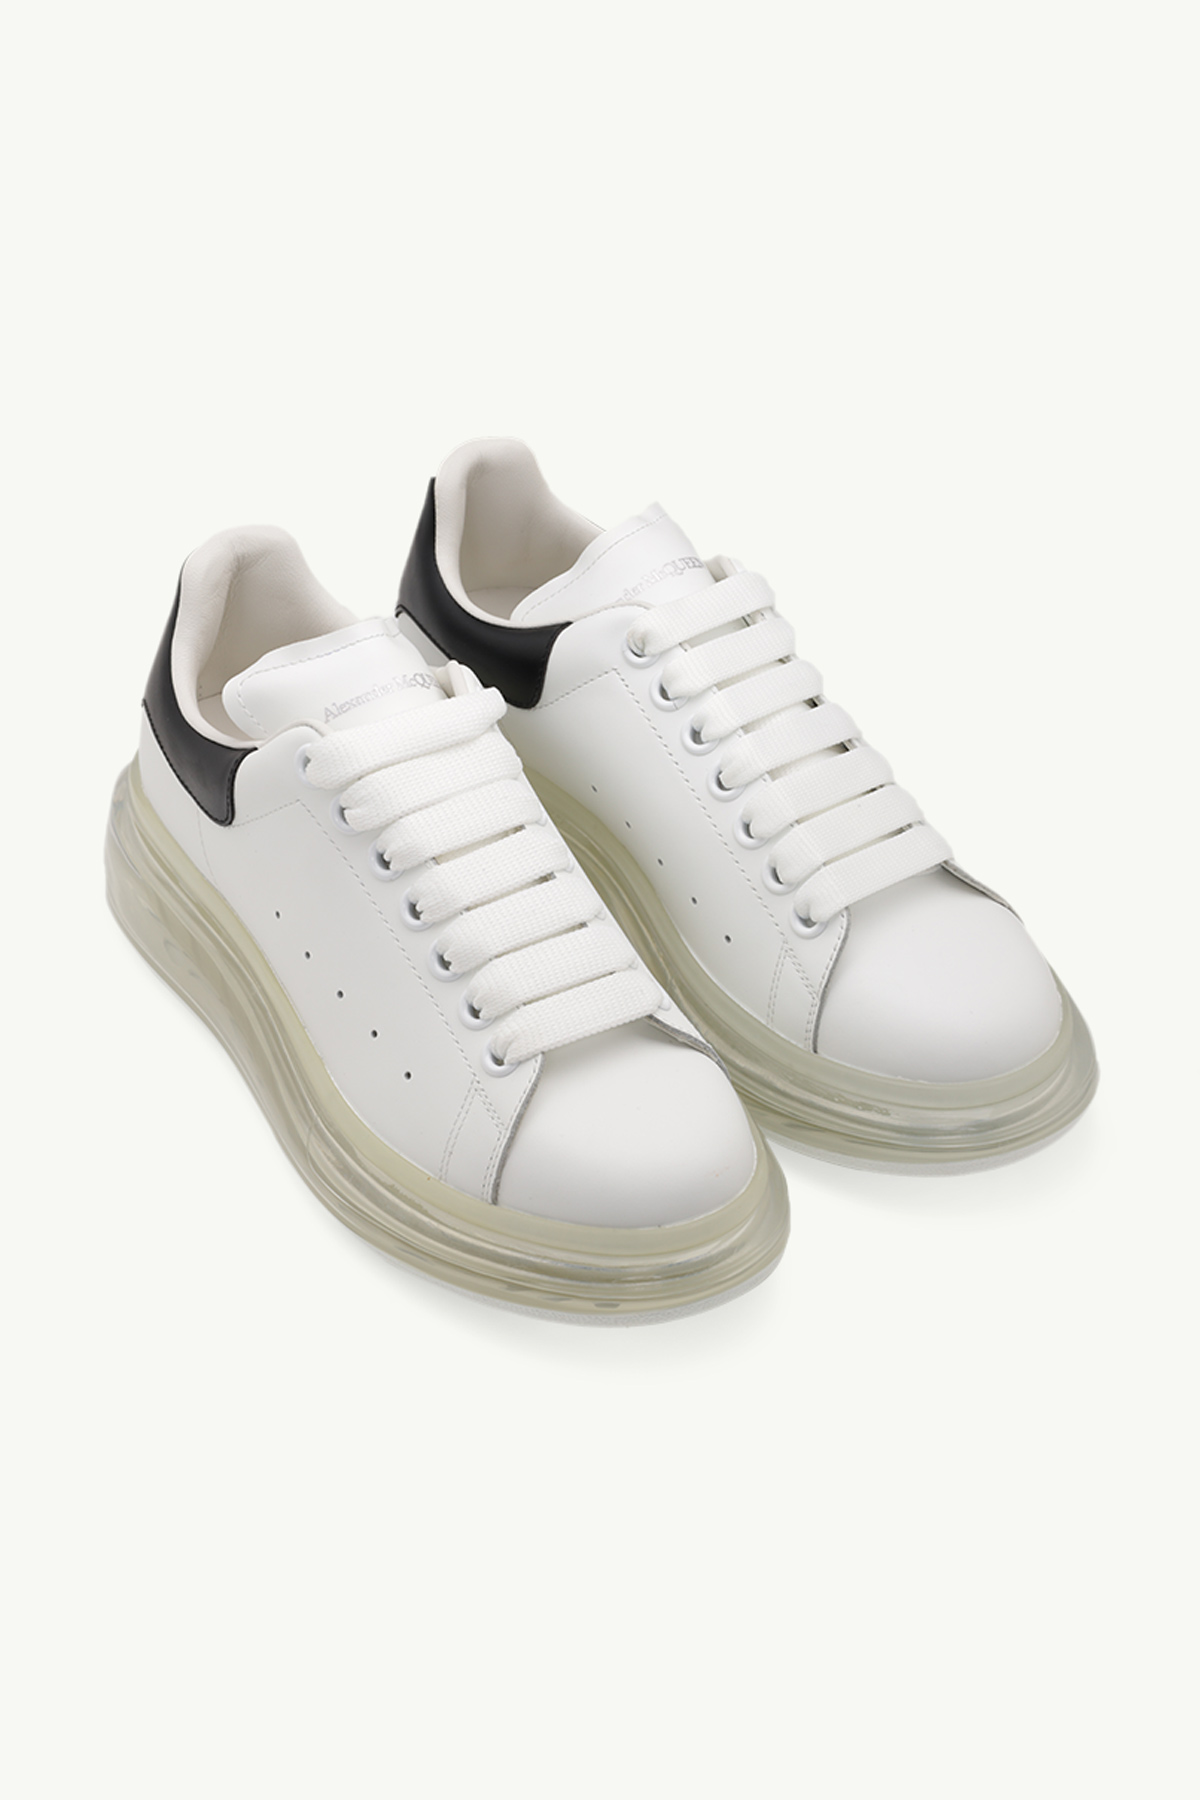 ALEXANDER MCQUEEN Women Transparent Oversized Lace-up Sneakers in White/Black Smooth Leather 1